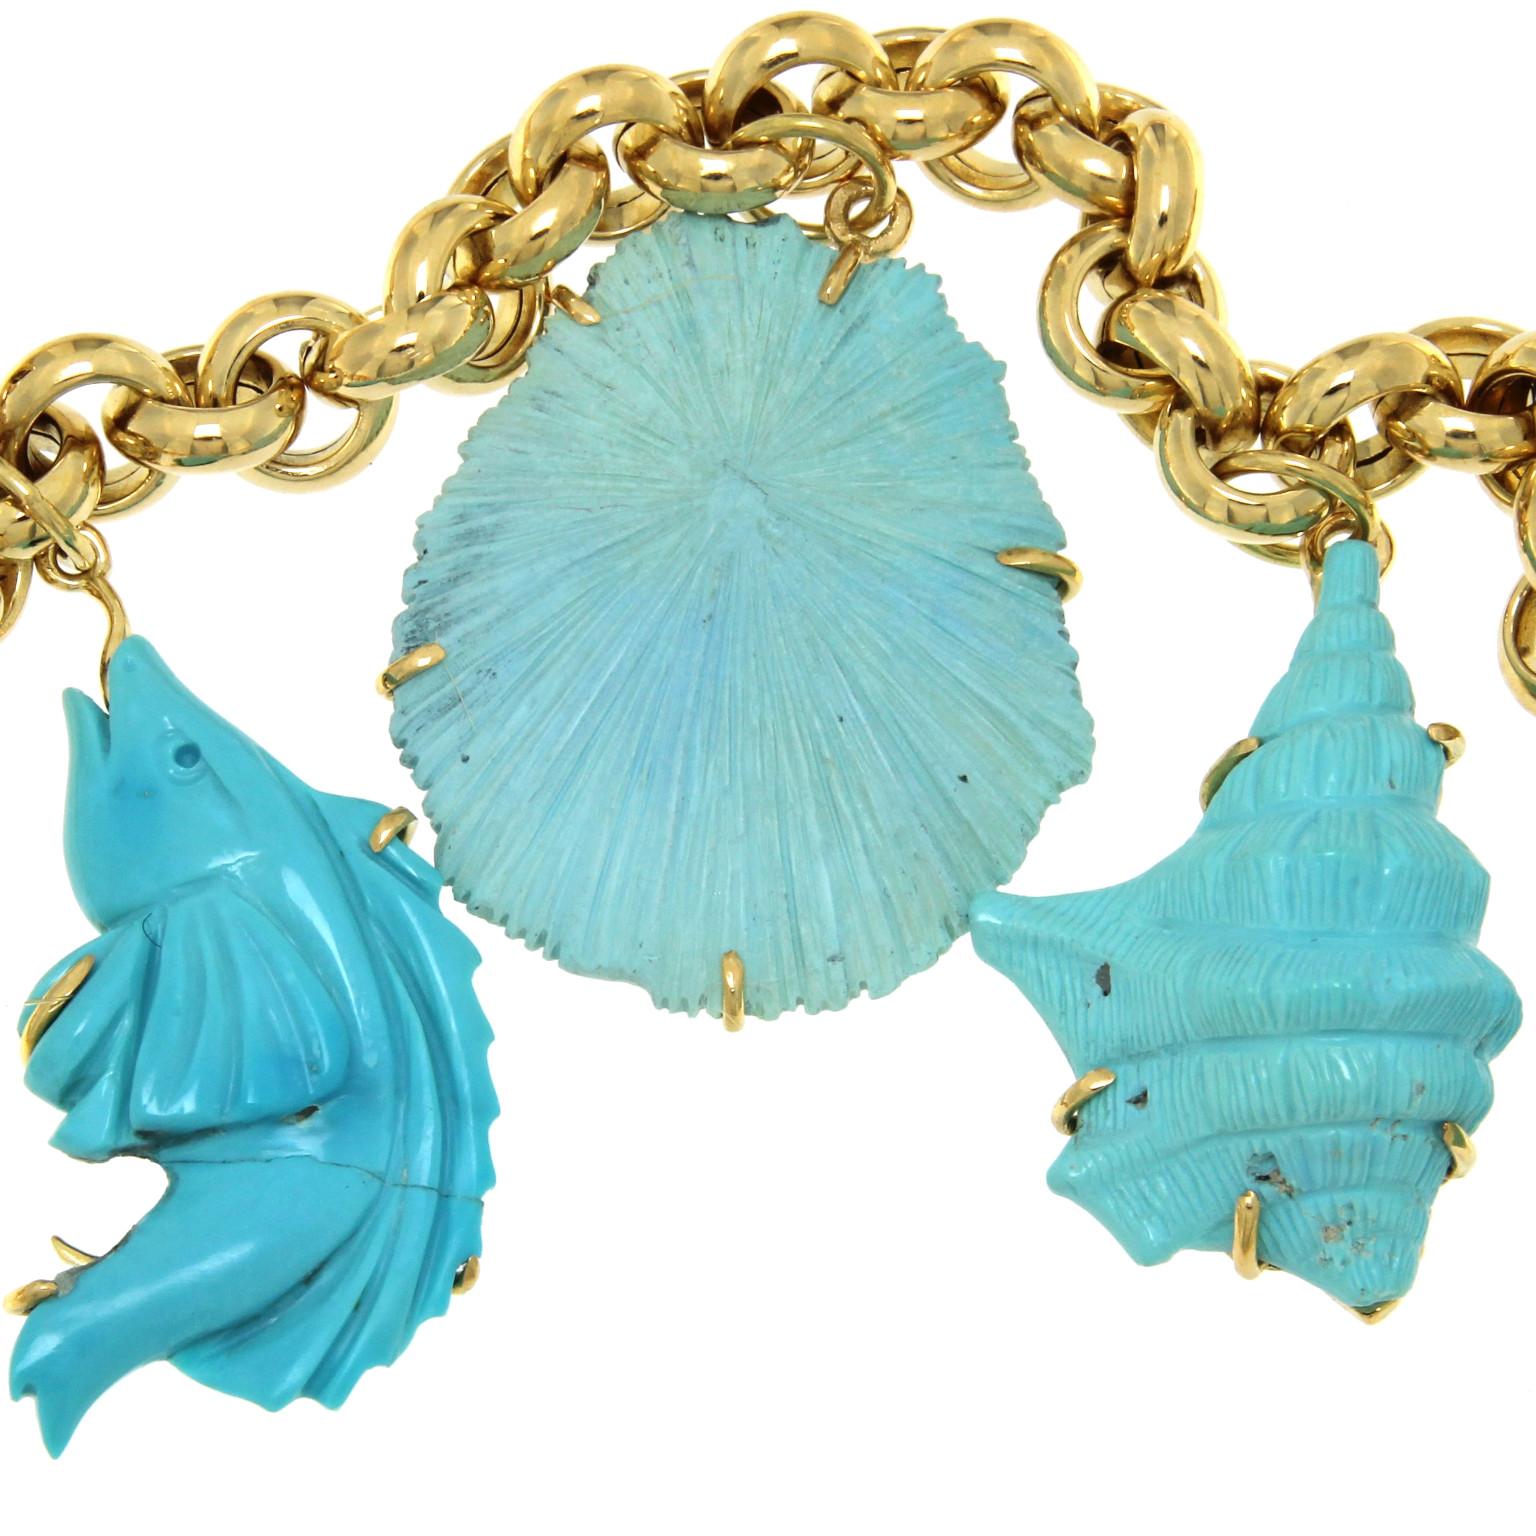 
This beautiful necklace from the Beachwear collection reproduces some marine elements alternately in pink coral, turquoise and gold, for both materials the sculptor has done an excellent work of realistic reproduction very faithful. The result is